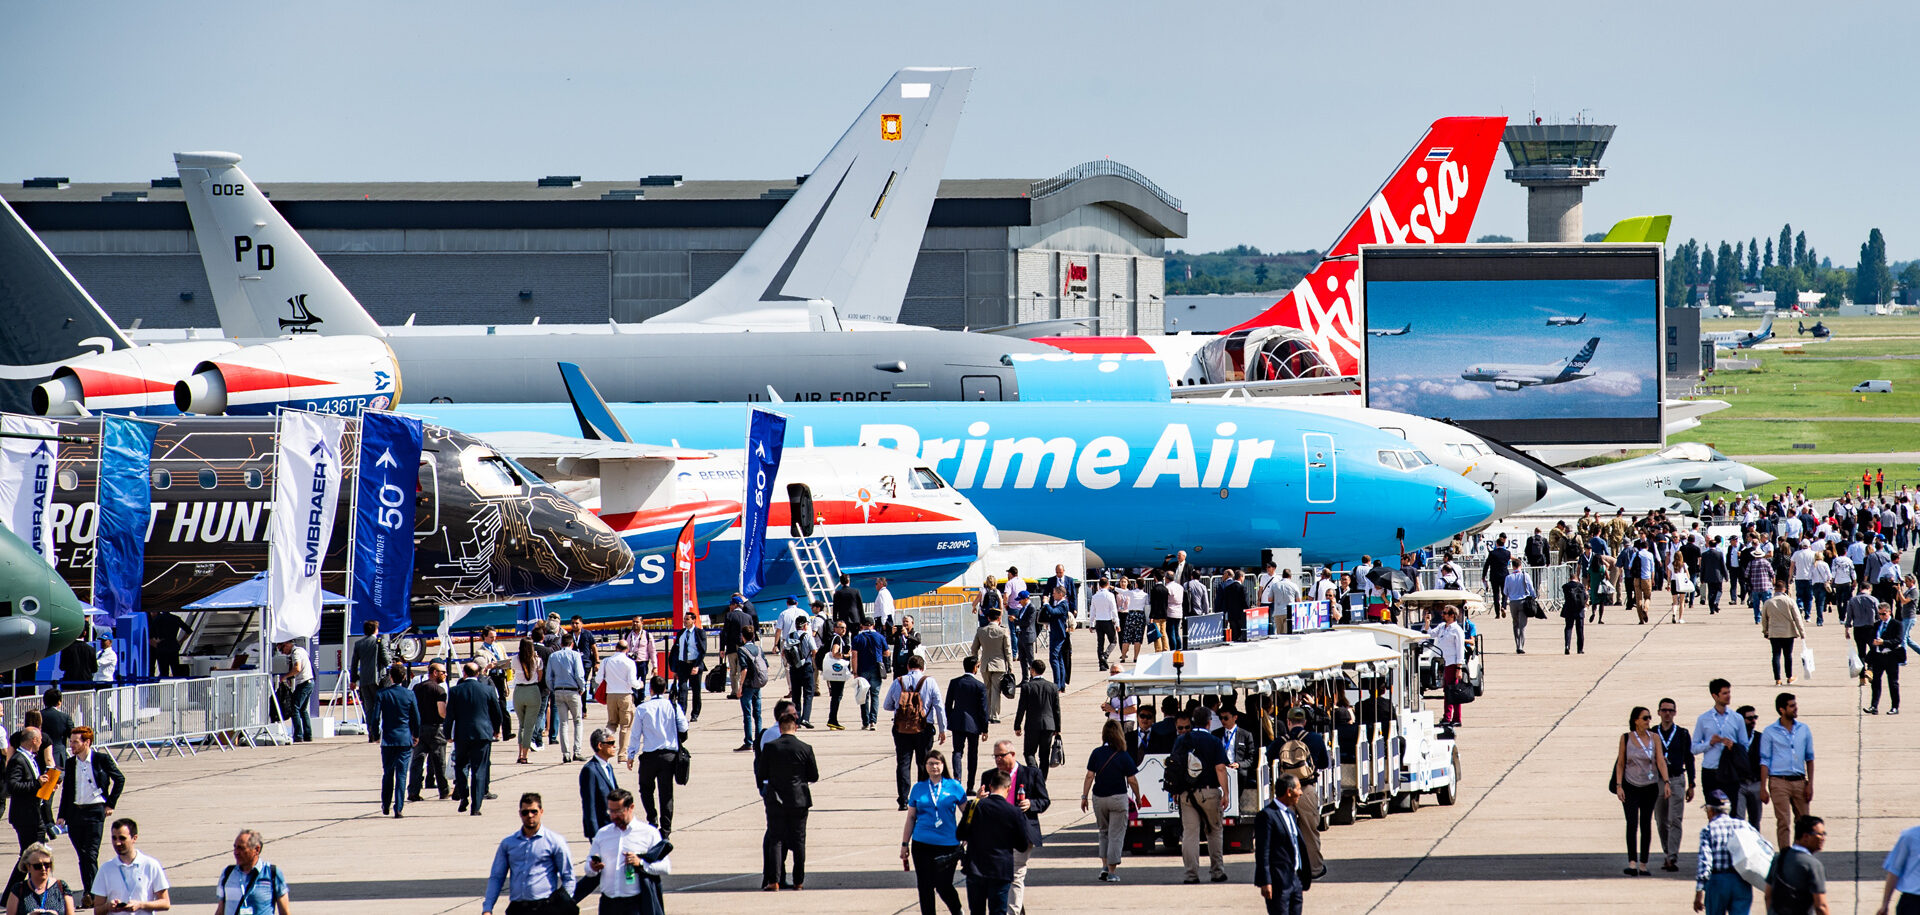 The 2019 edition of the historic Paris Air Show took place in June.